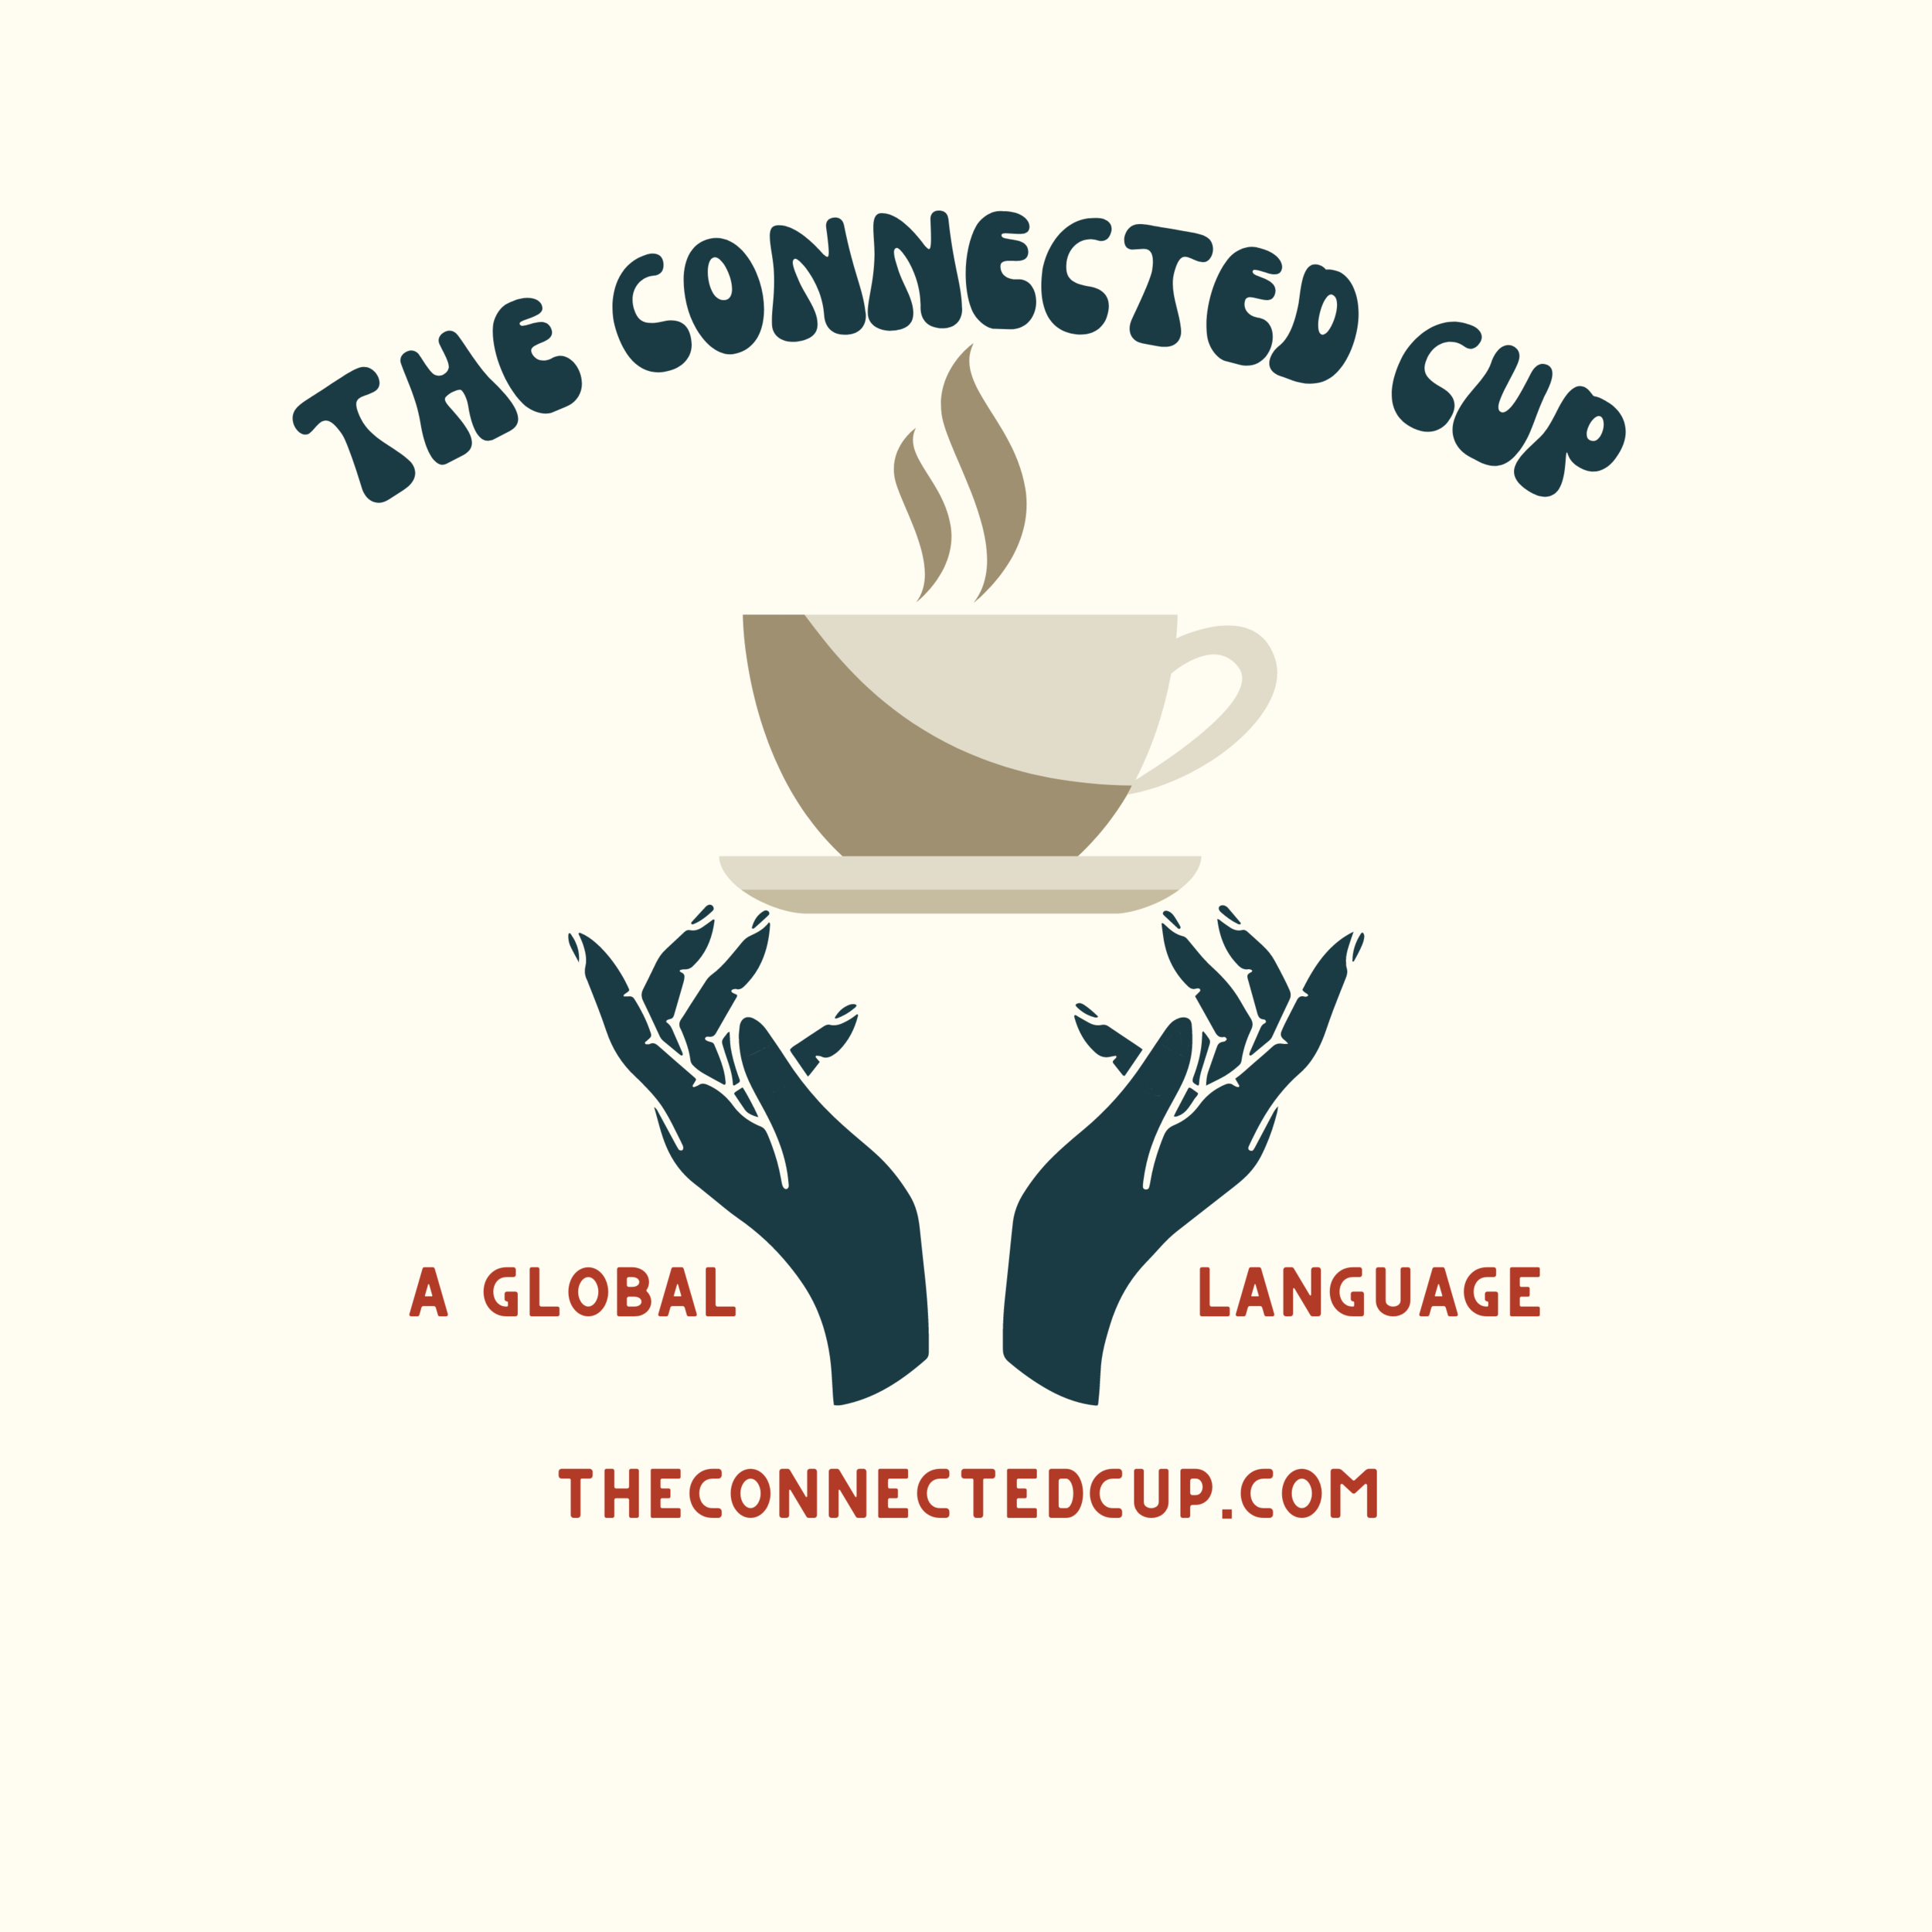 THE CONNECTED CUP